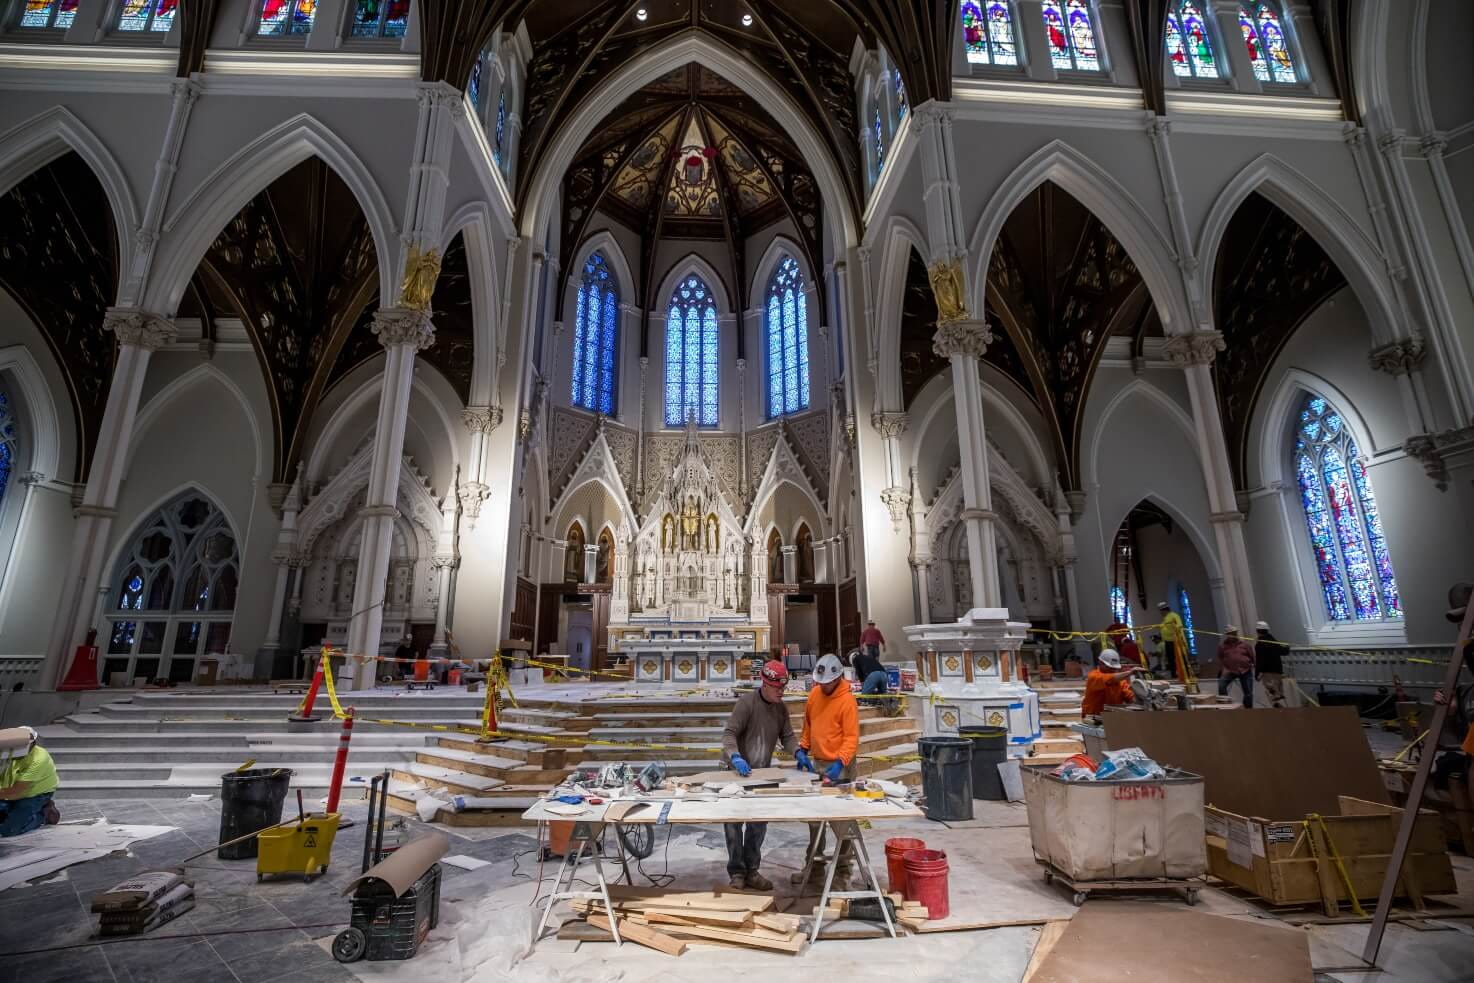 LATICRETE rapid setting grouts, SPECTRALOCK PRO Premium and PERMACOLOR Select being used in the renovation of the Cathedral of the Holy Cross in Boston, Massachusetts 